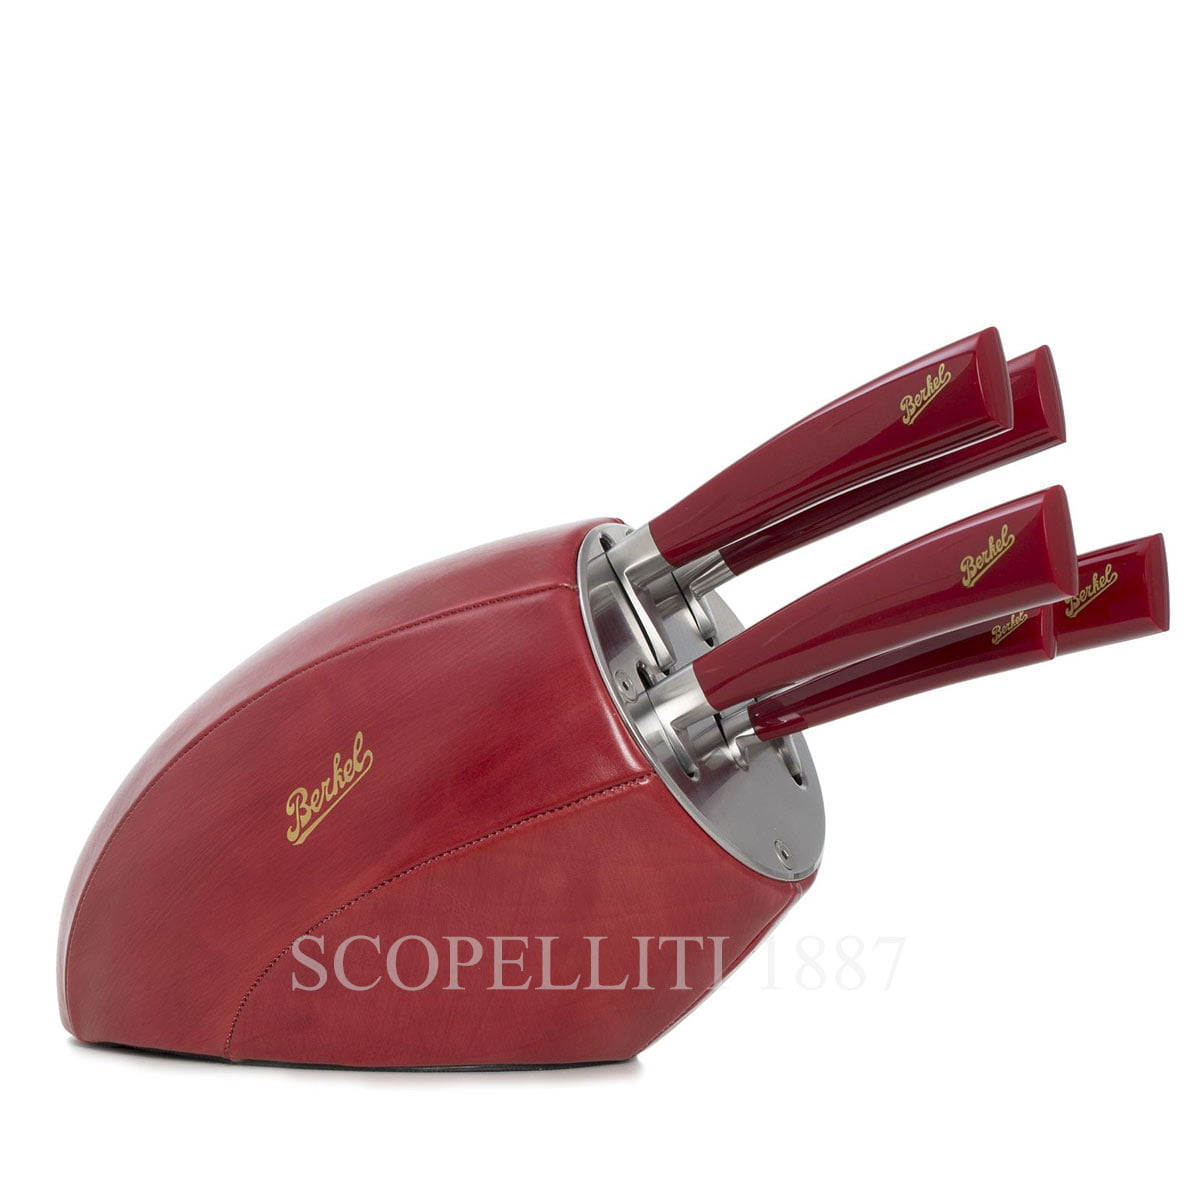 berkel gift block with 5 knives red leather